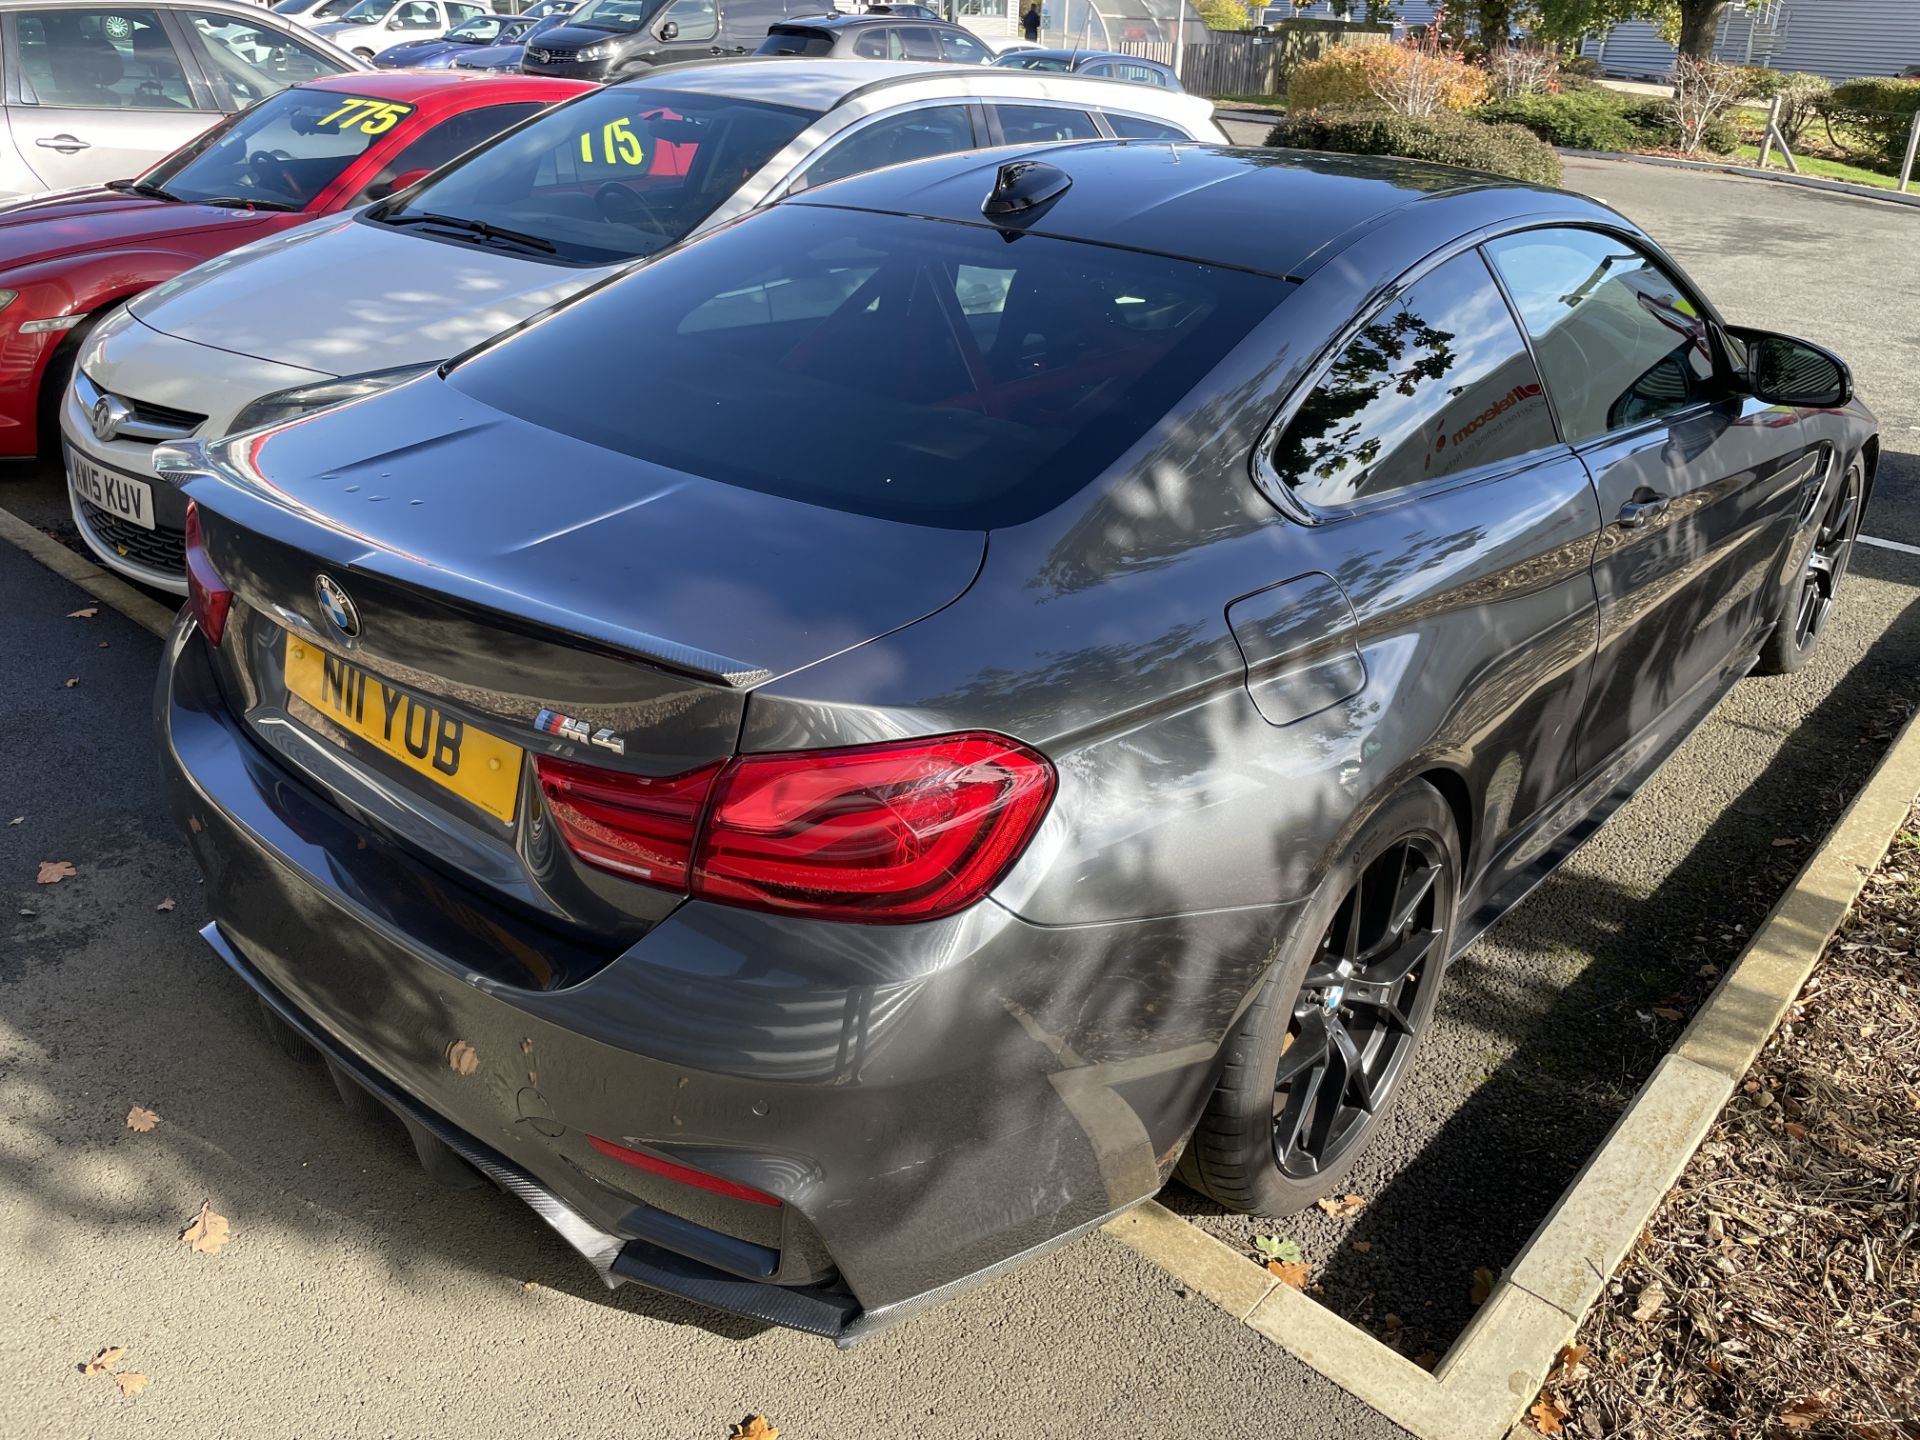 BMW M4 S-A 3.0 Petrol Automatic Two Door Coupe Converted Into Track CarRegistration Number N11 YOB - Image 4 of 16